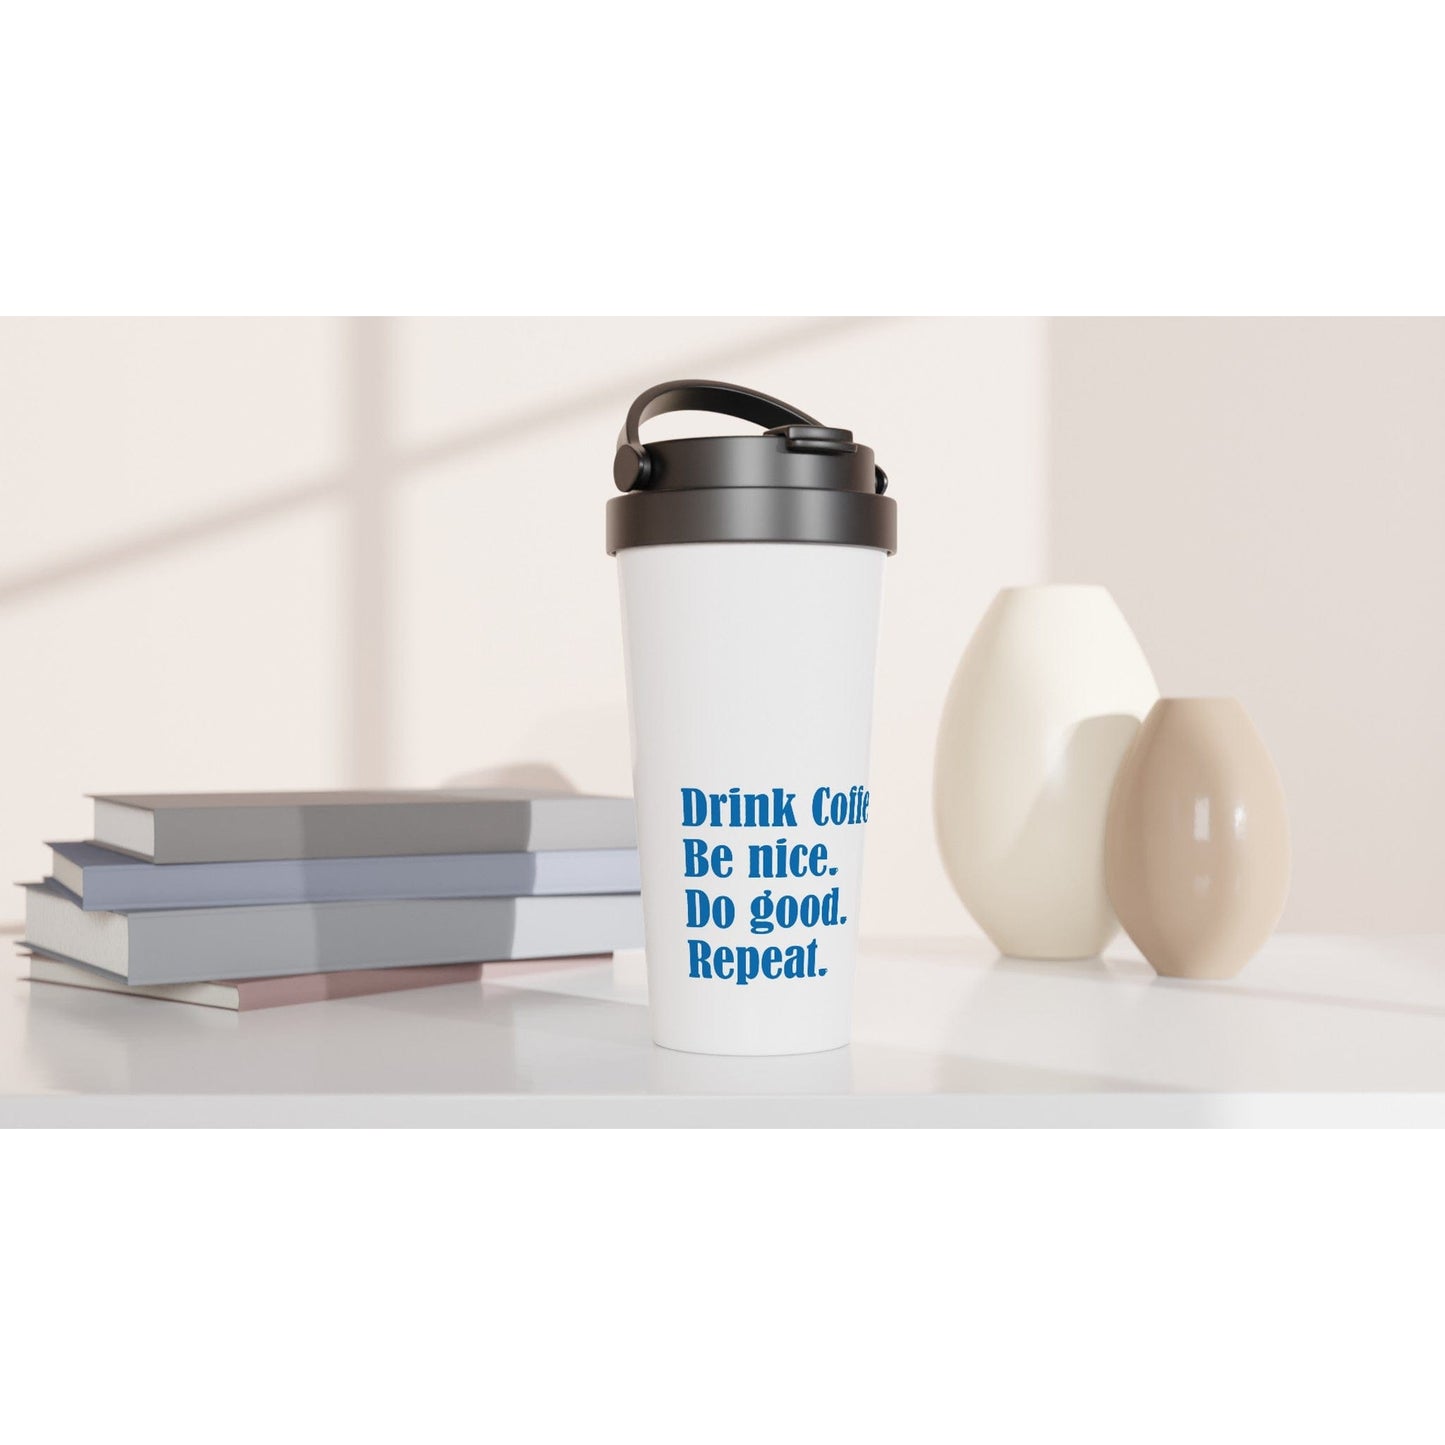 Good Bean Gifts "Drink Coffee, Be Nice, Do Good, Repeat". 15oz Stainless Steel Travel Mug